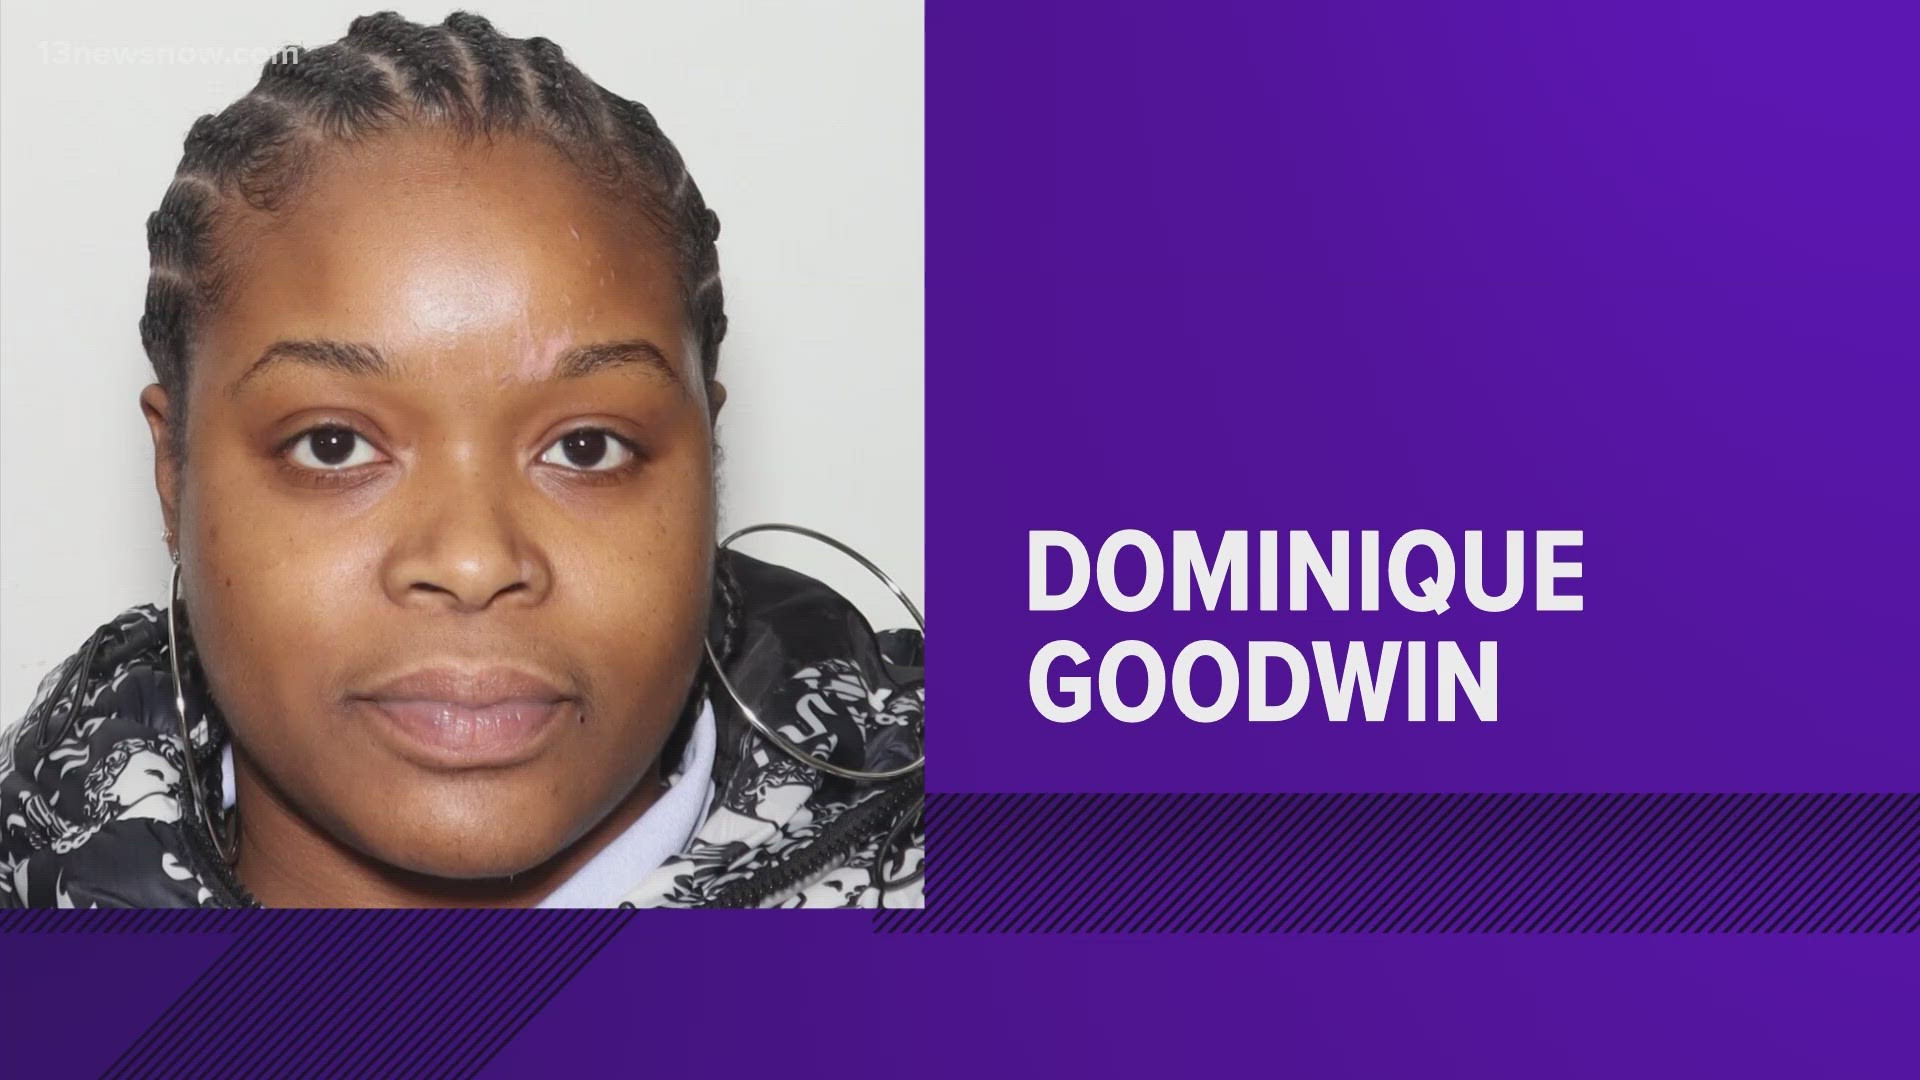 For weeks, state troopers have been trying to locate and capture 27-year-old Dominique Goodwin of Chesapeake. She's charged with aggravated involuntary manslaughter.